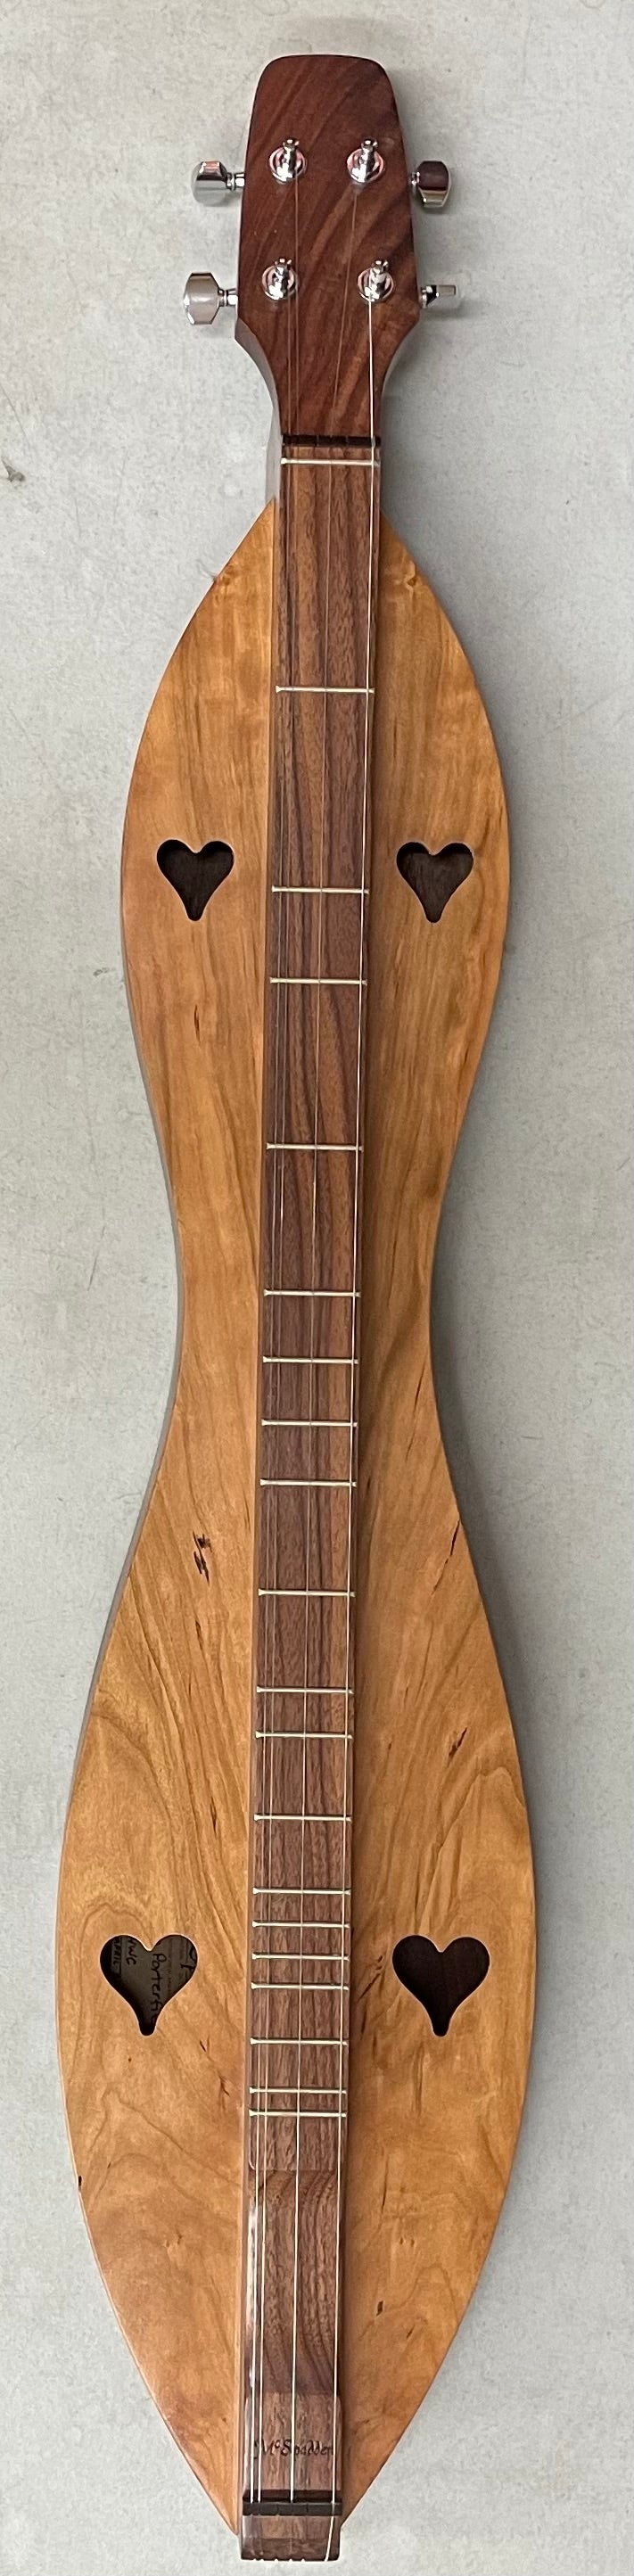 A handcrafted 4 String, Flathead, Hourglass, with Walnut back and Cherry sides and top (4FHWC), featuring heart-shaped sound holes and six tuning pegs. The fretboard is dark wood, contrasting beautifully with the lighter wooden body. Perfect for a beginner dulcimer player, this exquisite instrument rests elegantly on a flat surface.